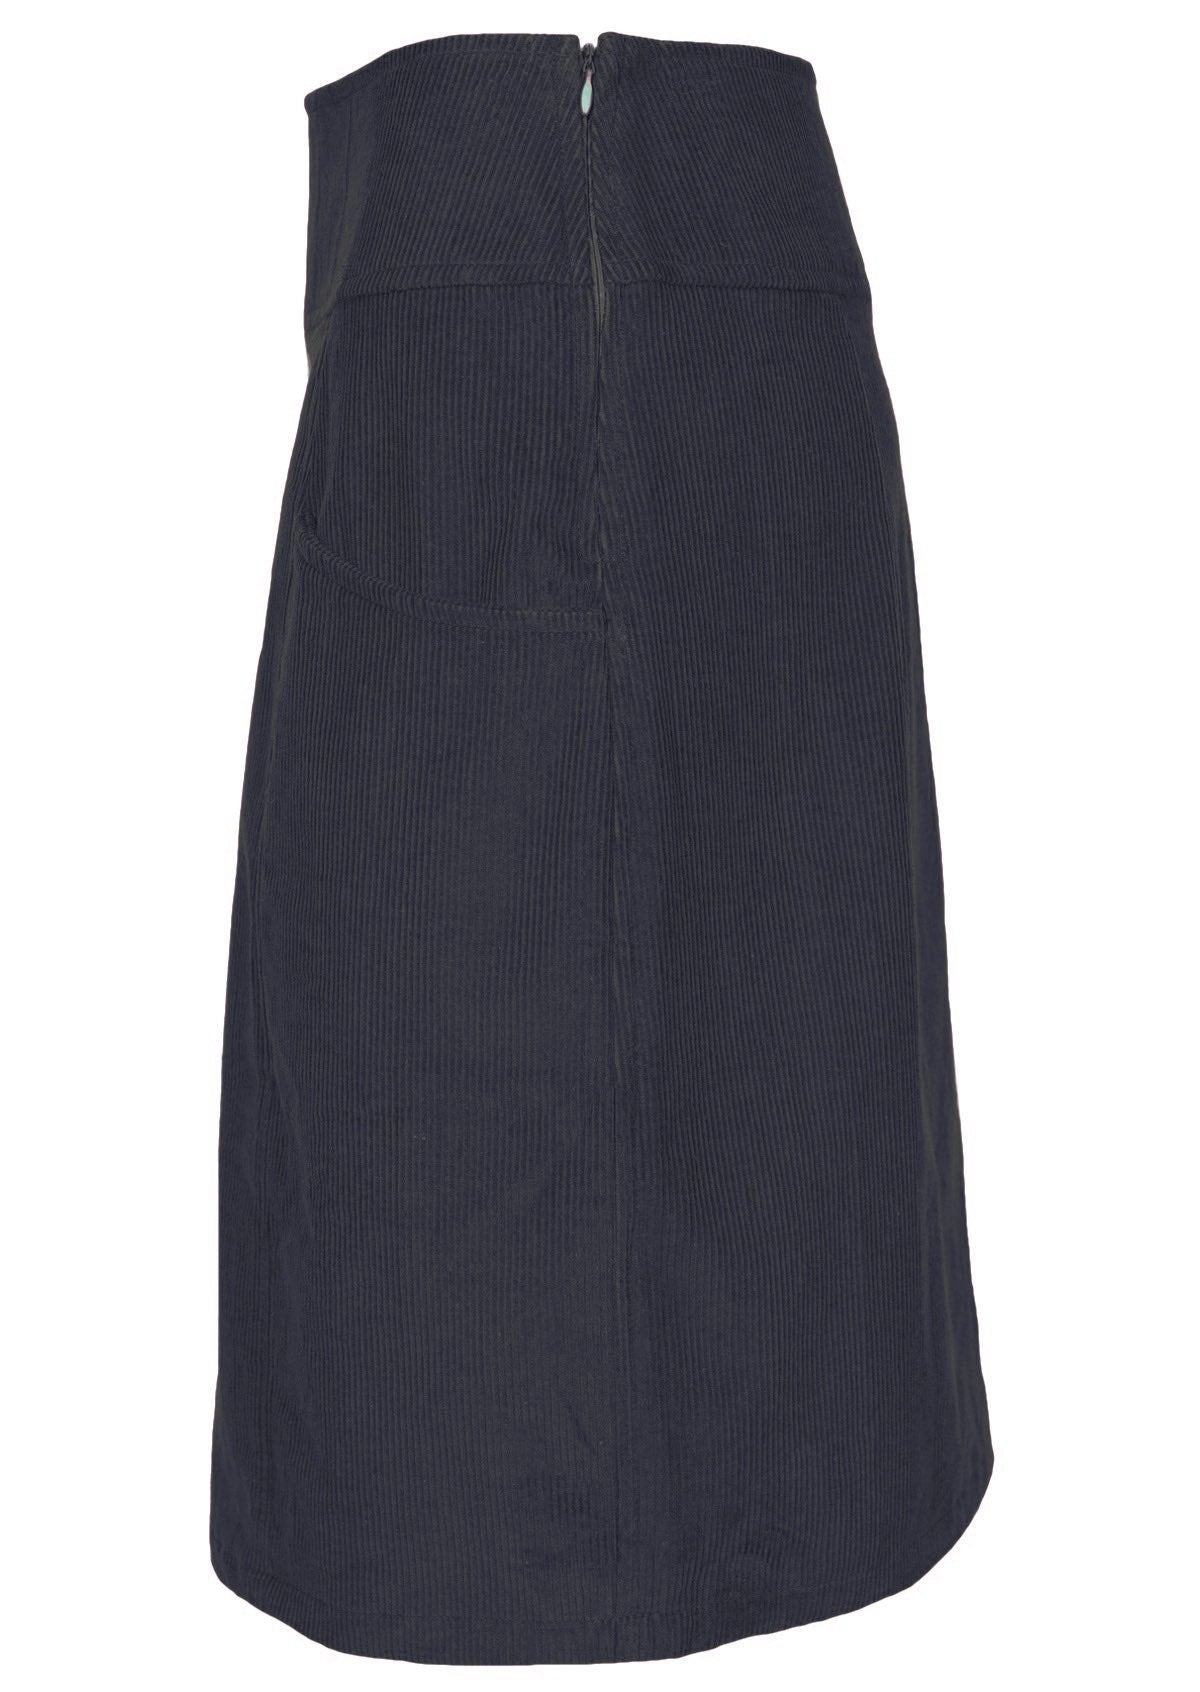 Deep bluish-grey skirt is mid length with pockets. 